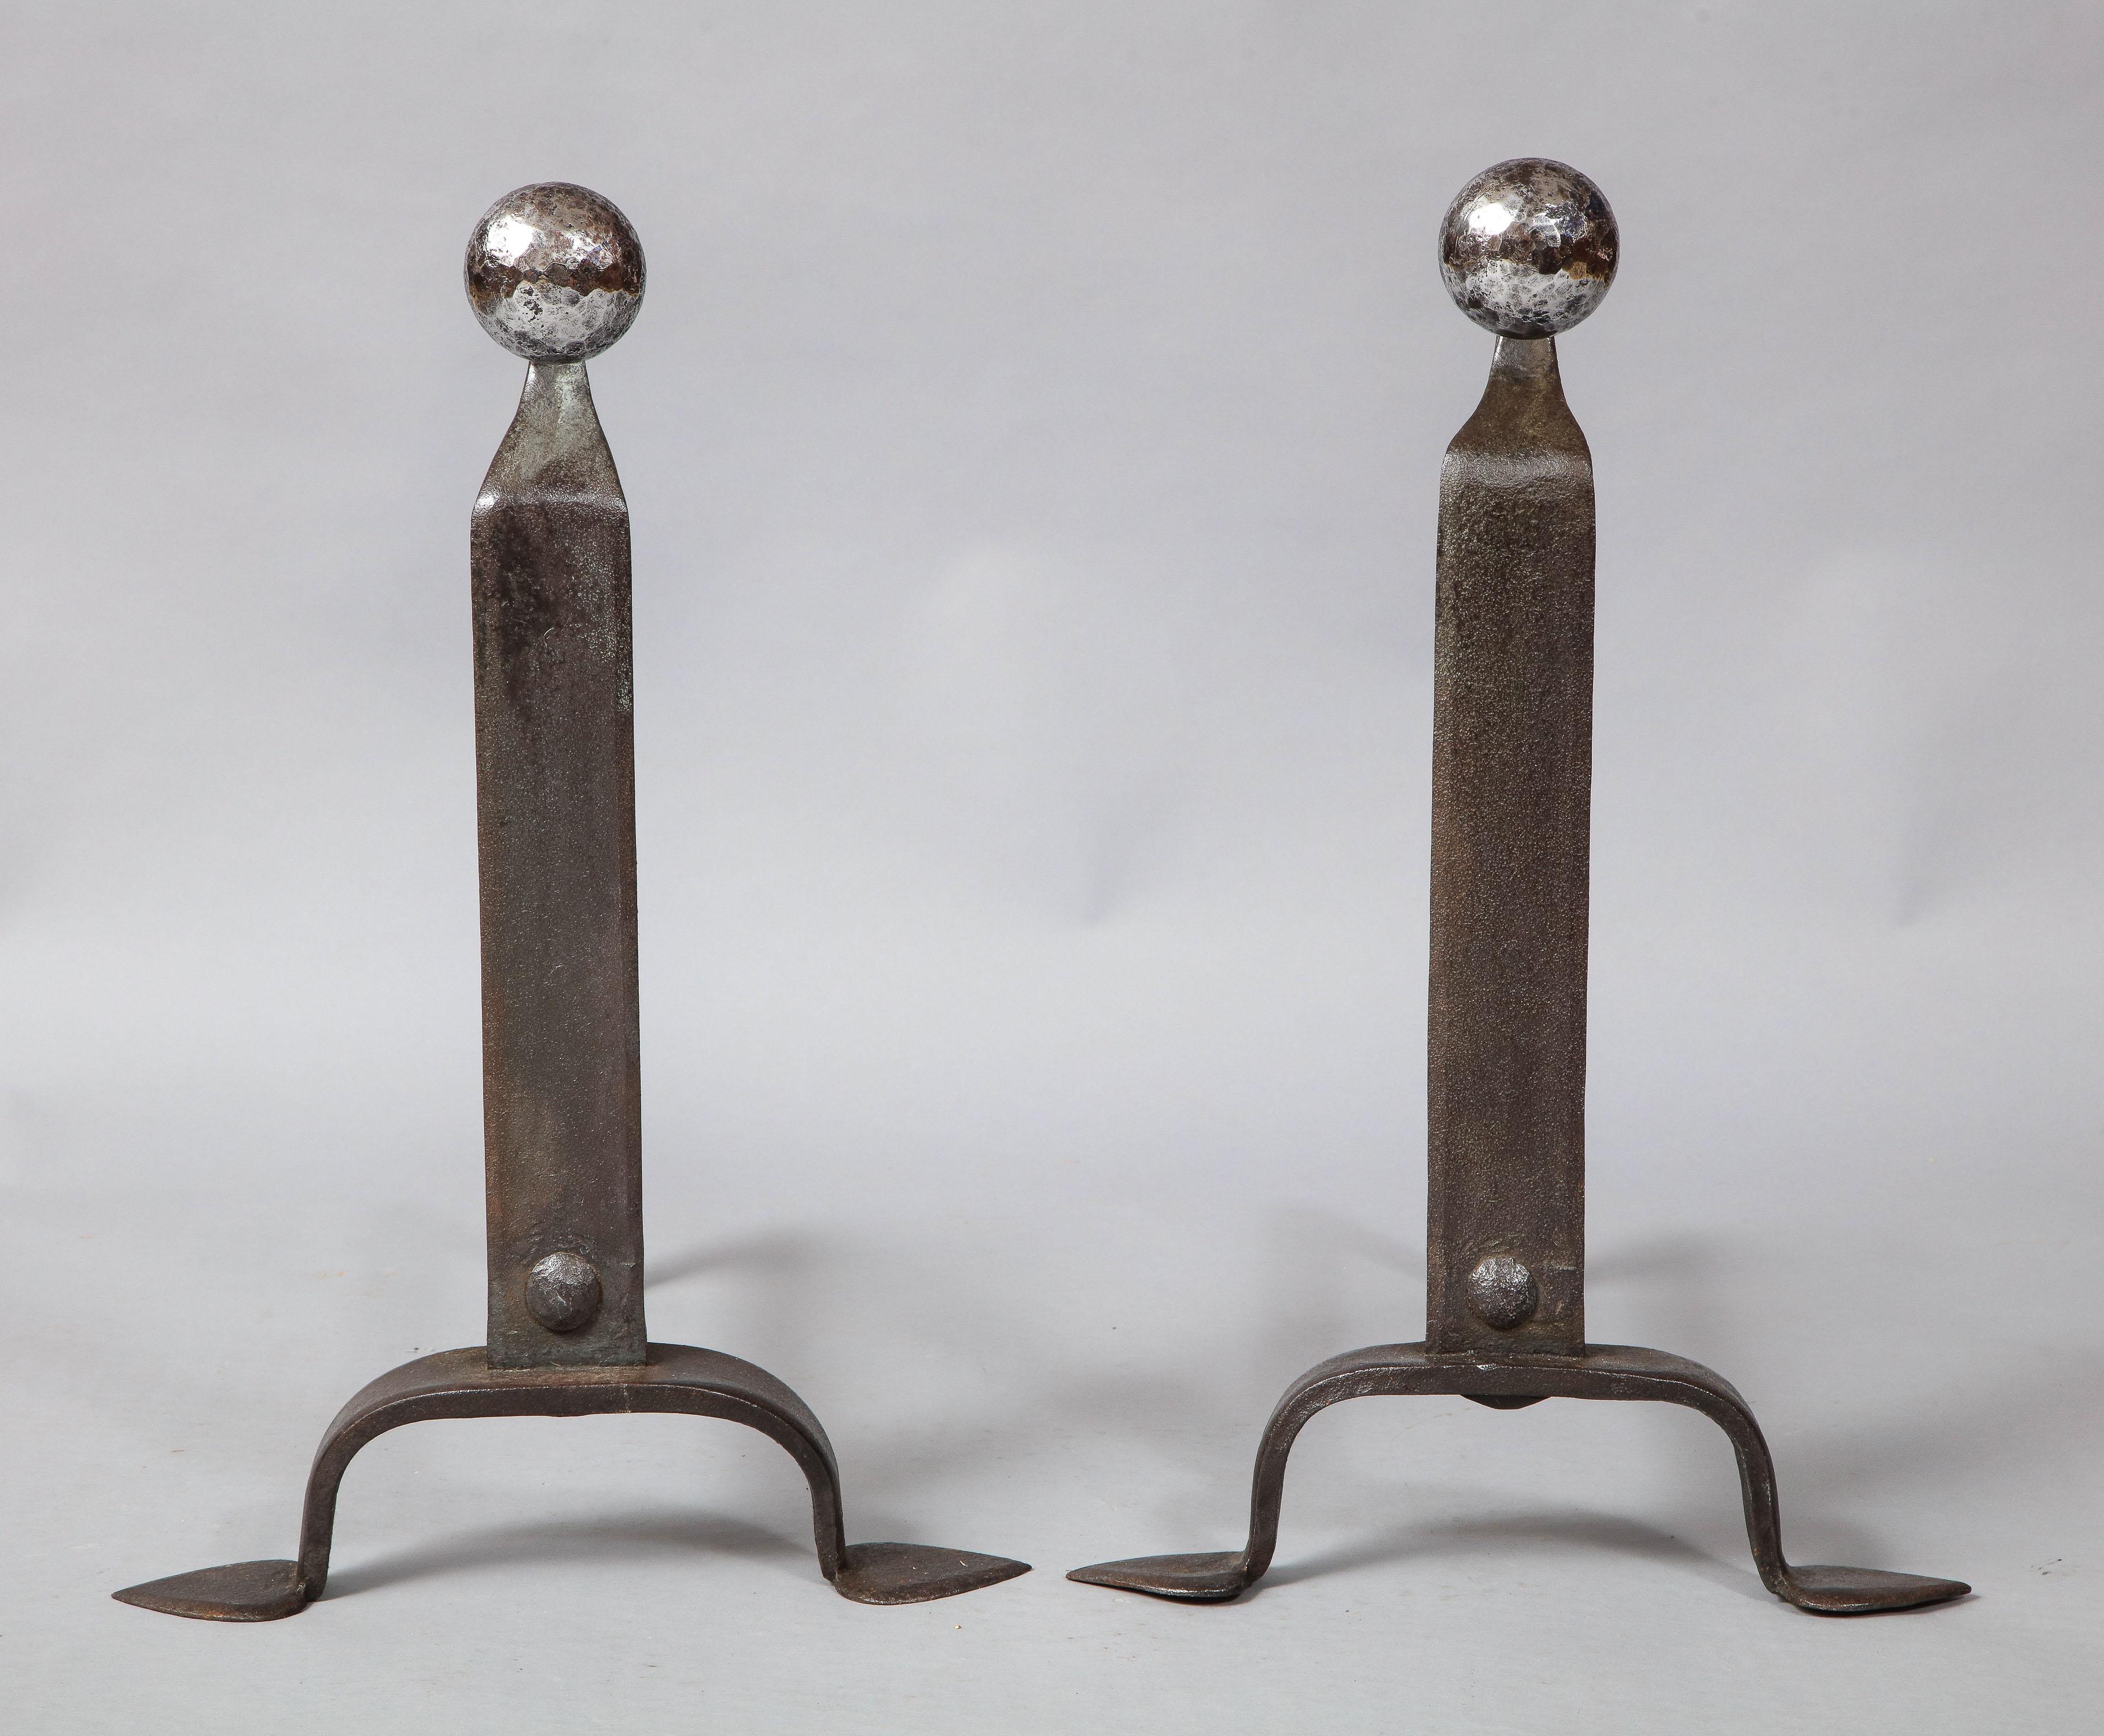 Very good pair of early 20th century blacksmith made andirons having bright polished steel hammered ball finials on goose neck shafts, the beaten iron body ending in shaped legs ending in spade feet, the reverse side with rows of spit support hooks.